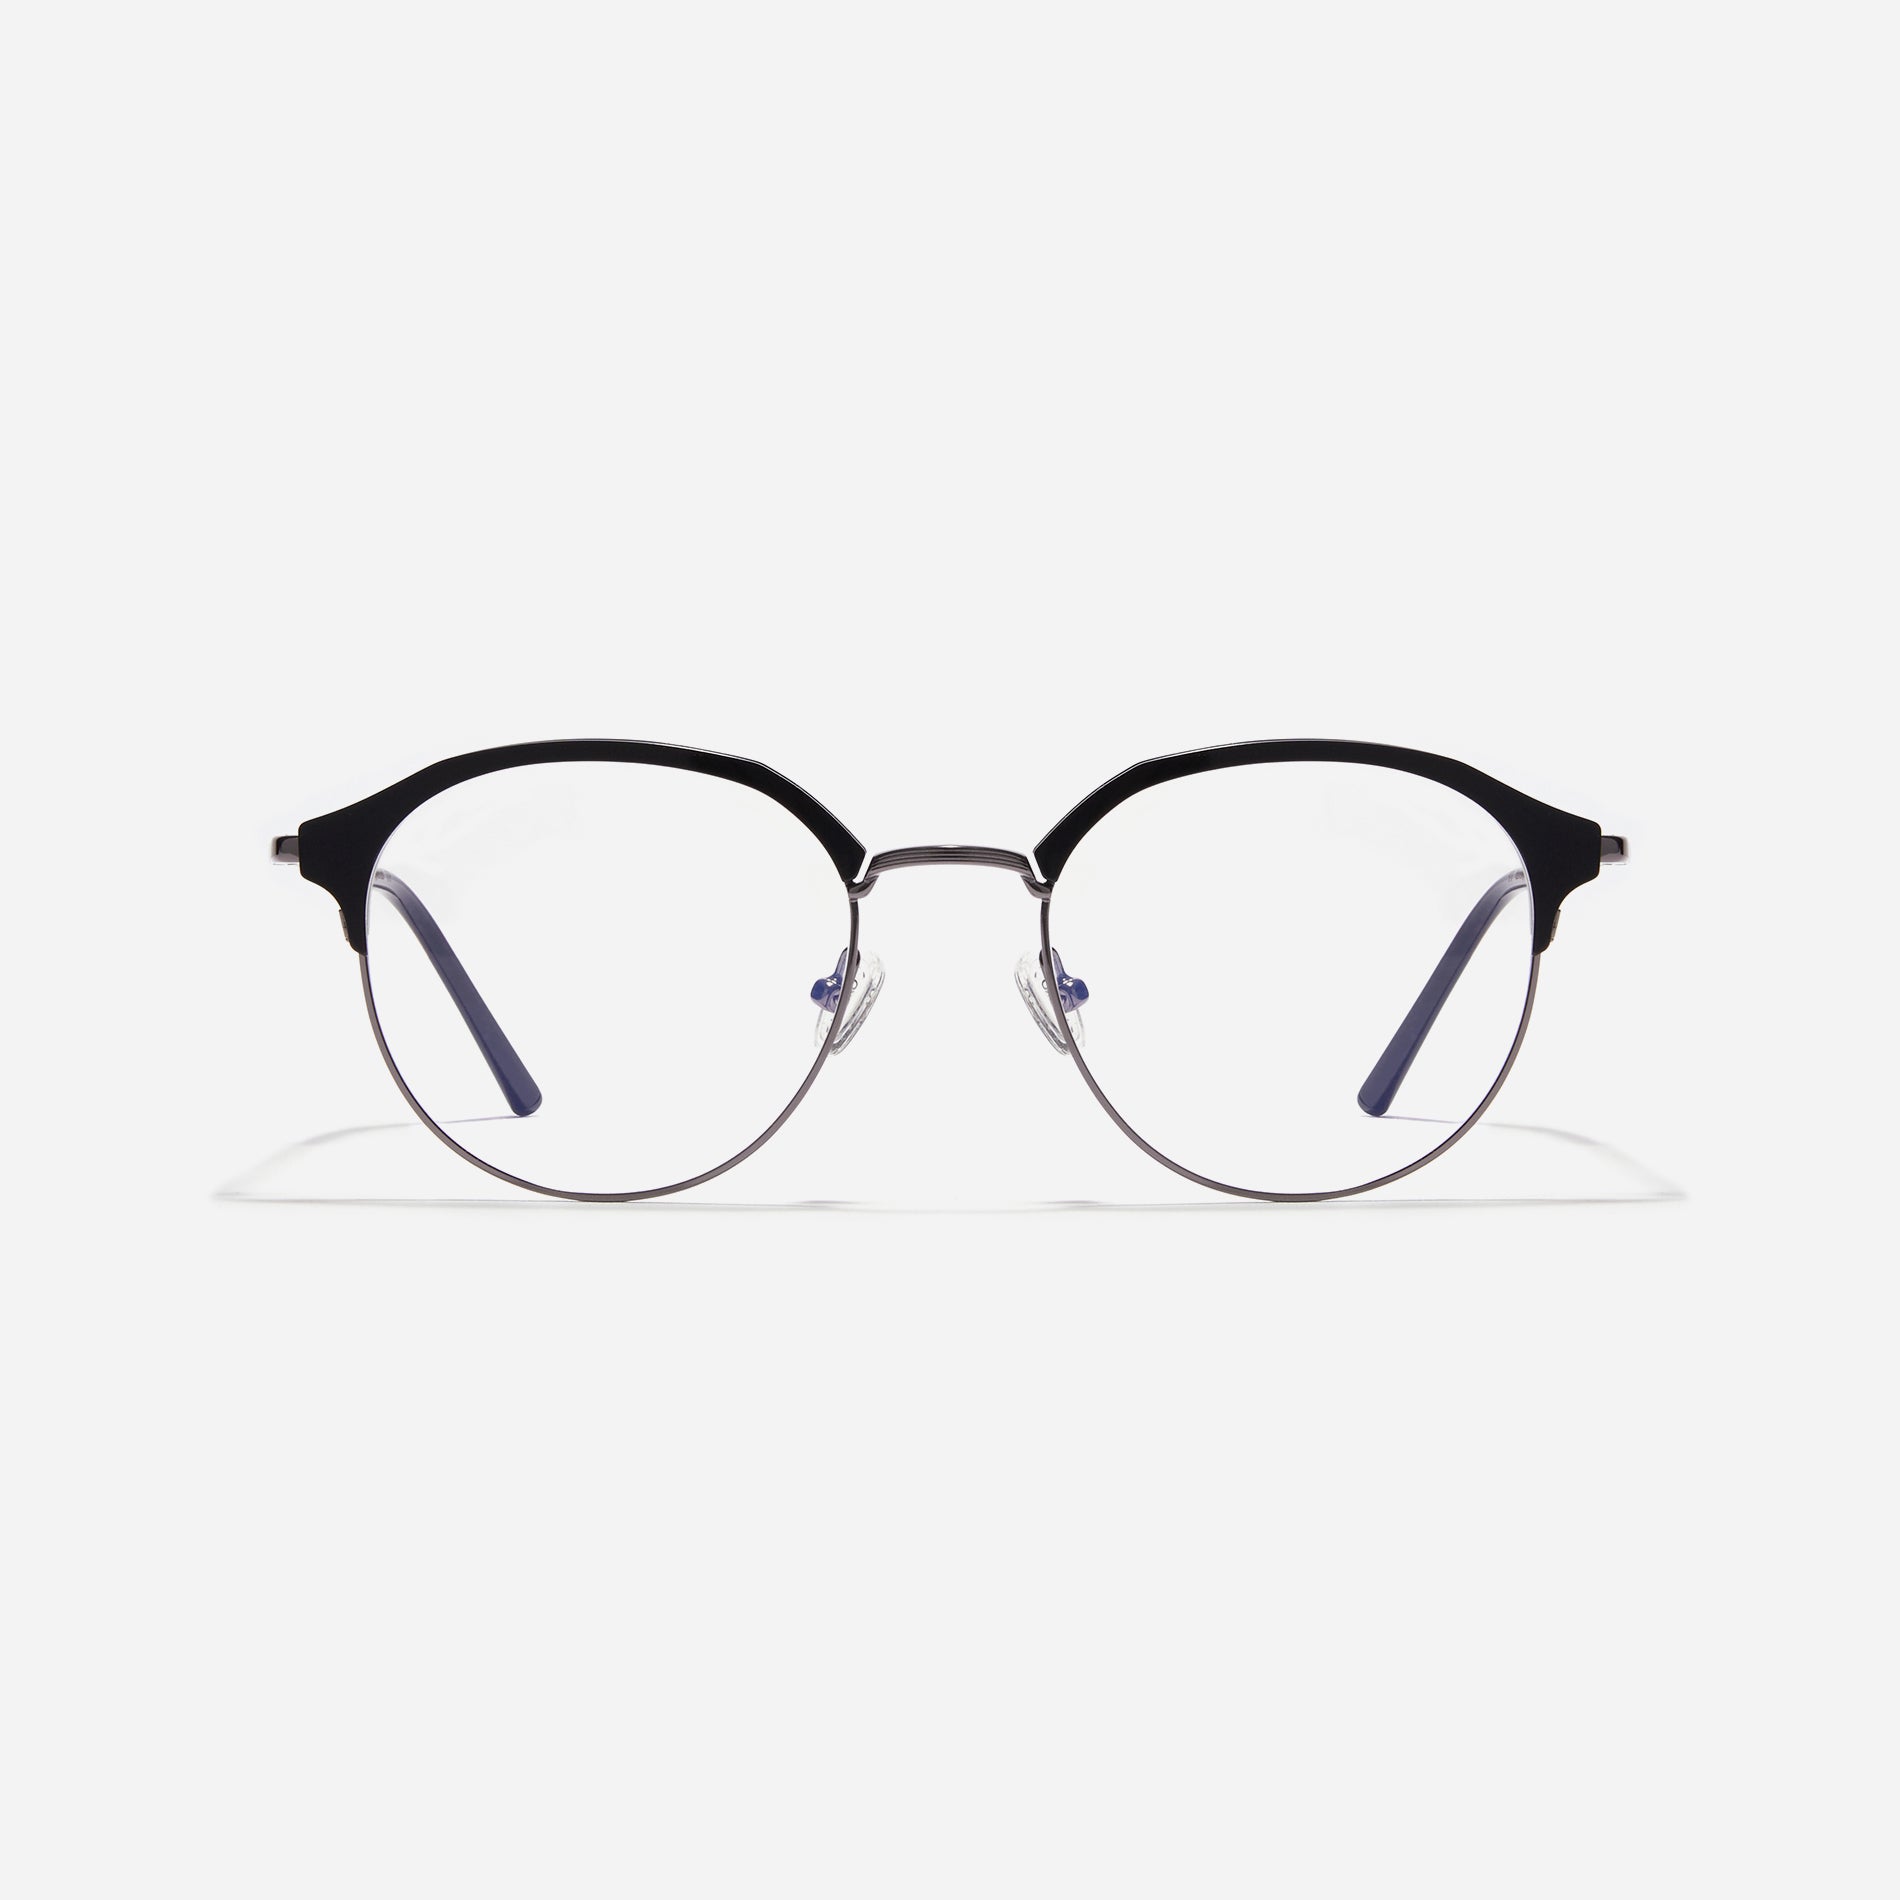 Oversized, round-shaped eyeglasses with a semi-rimless structure ideal for trendy styling and versatile wear.